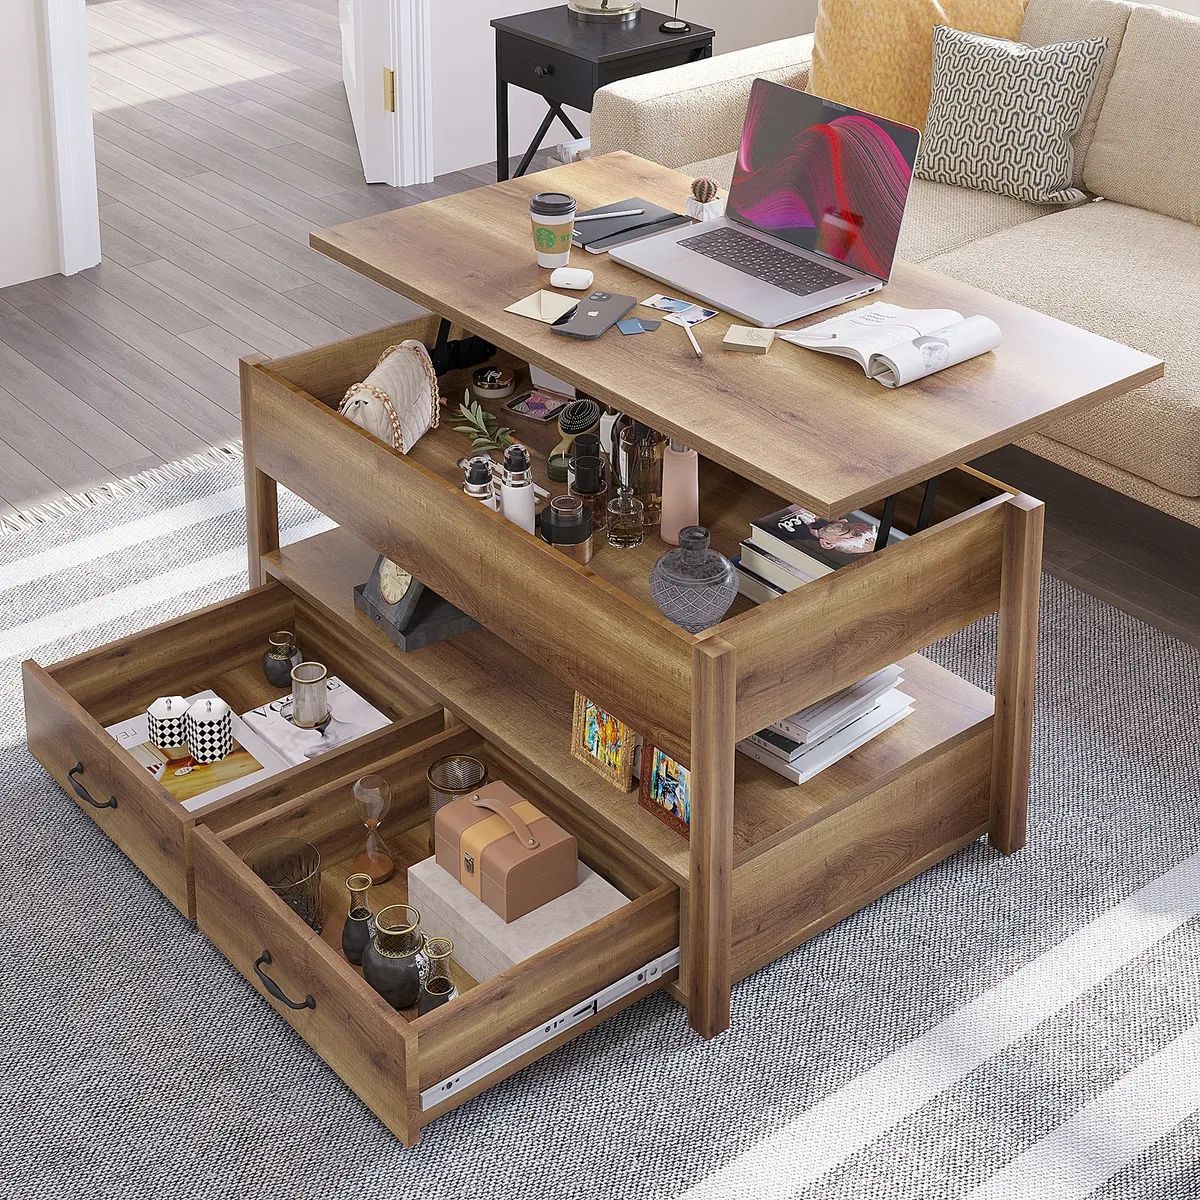 2 Drawer Lift Top Coffee Table Wooden With Hidden Compartment & Storage  Shelves | Ebay In Lift Top Coffee Tables With Storage Drawers (Photo 1 of 15)